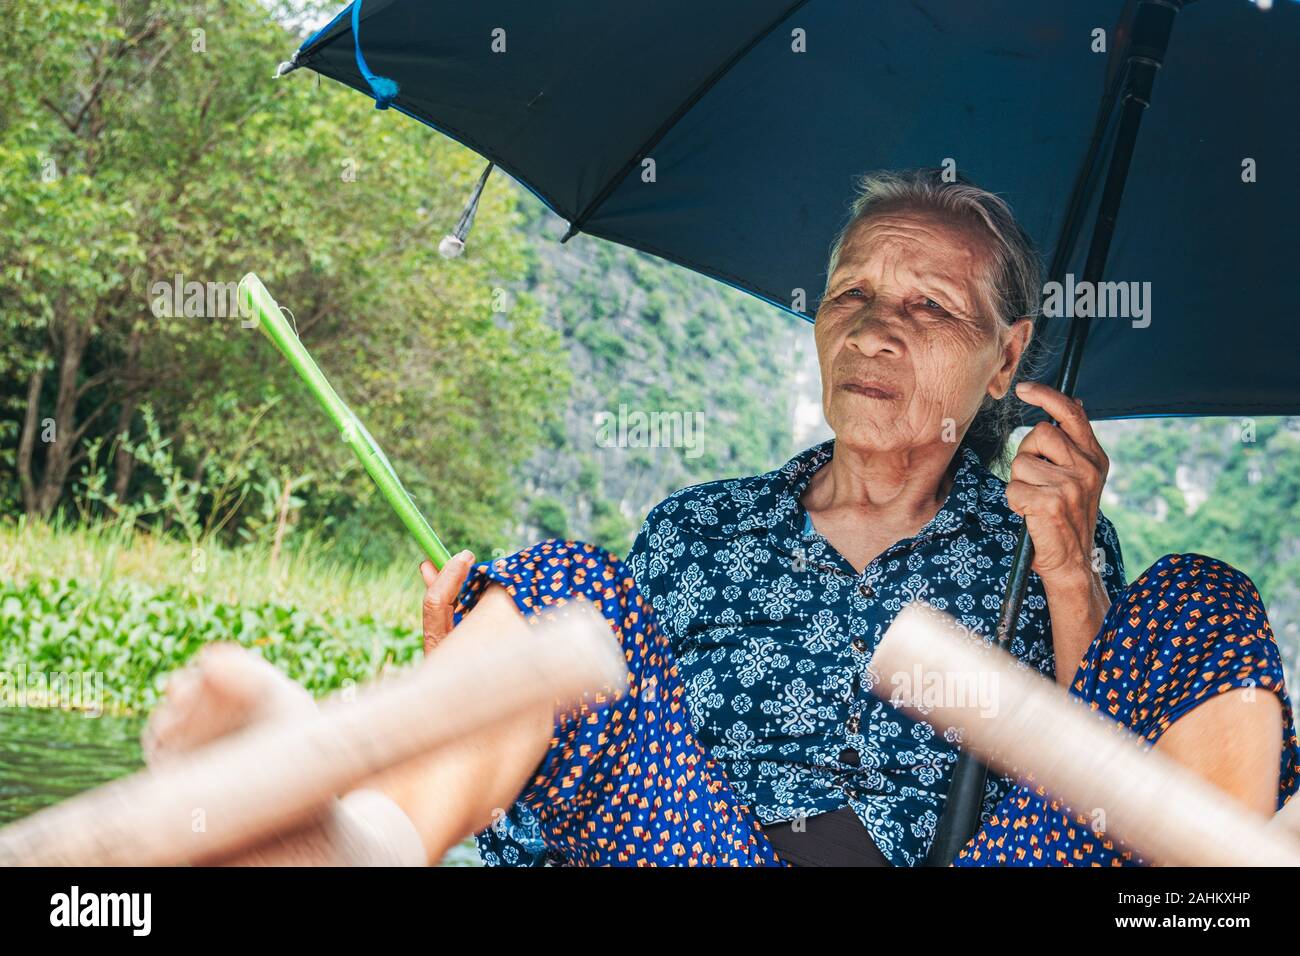 An elderly woman uses her feet to push the oars of a rowboat, while holding a fan and umbrella, taking tourists down the Ngo Dong River, Vietnam Stock Photo